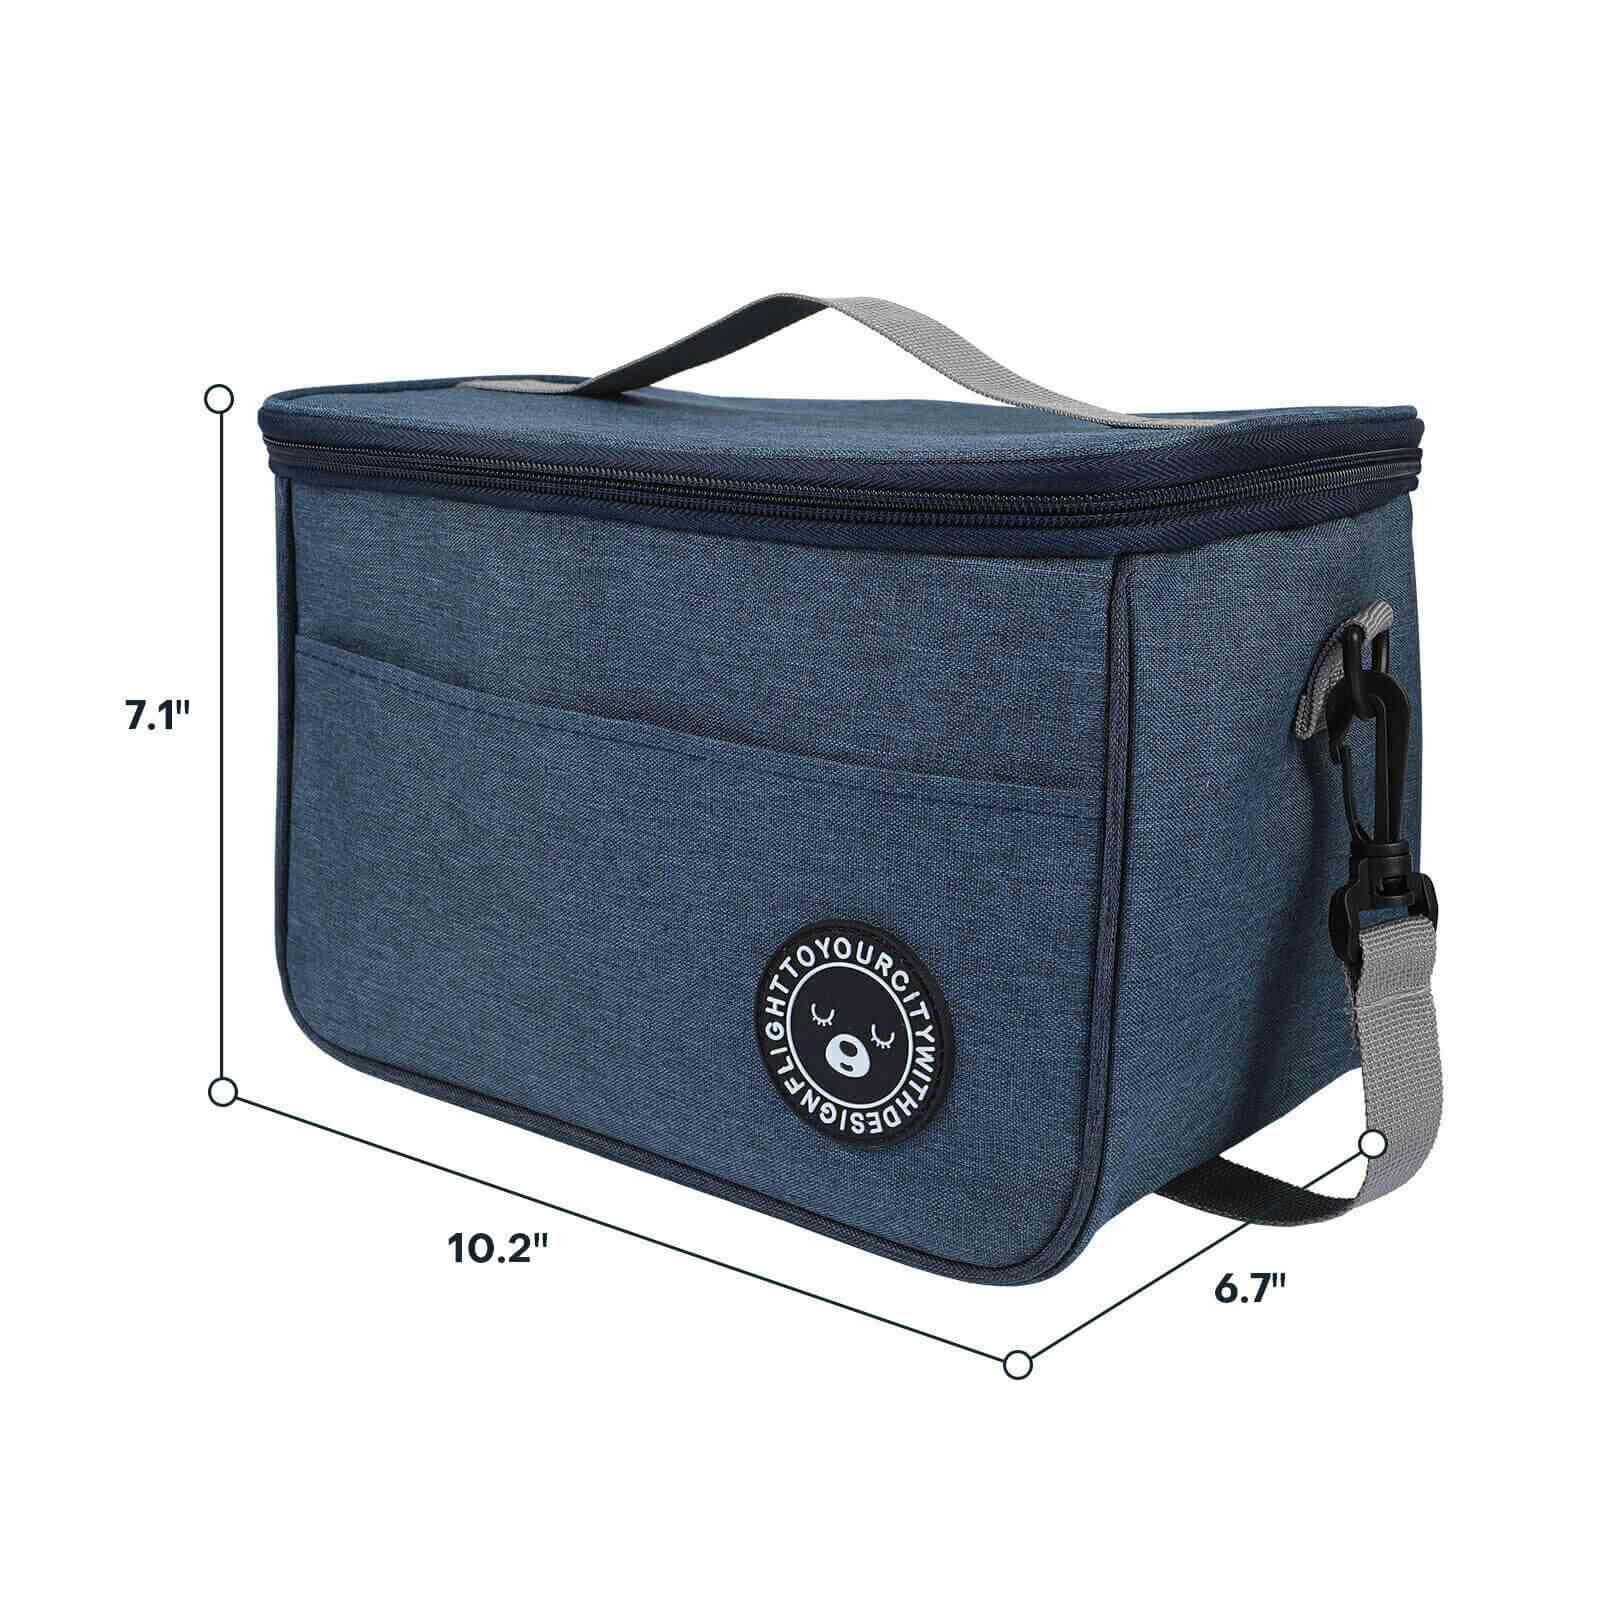 Bag Size of 1.5L 40W Portable Electric Lunch Box Food Warmer w/ Bag